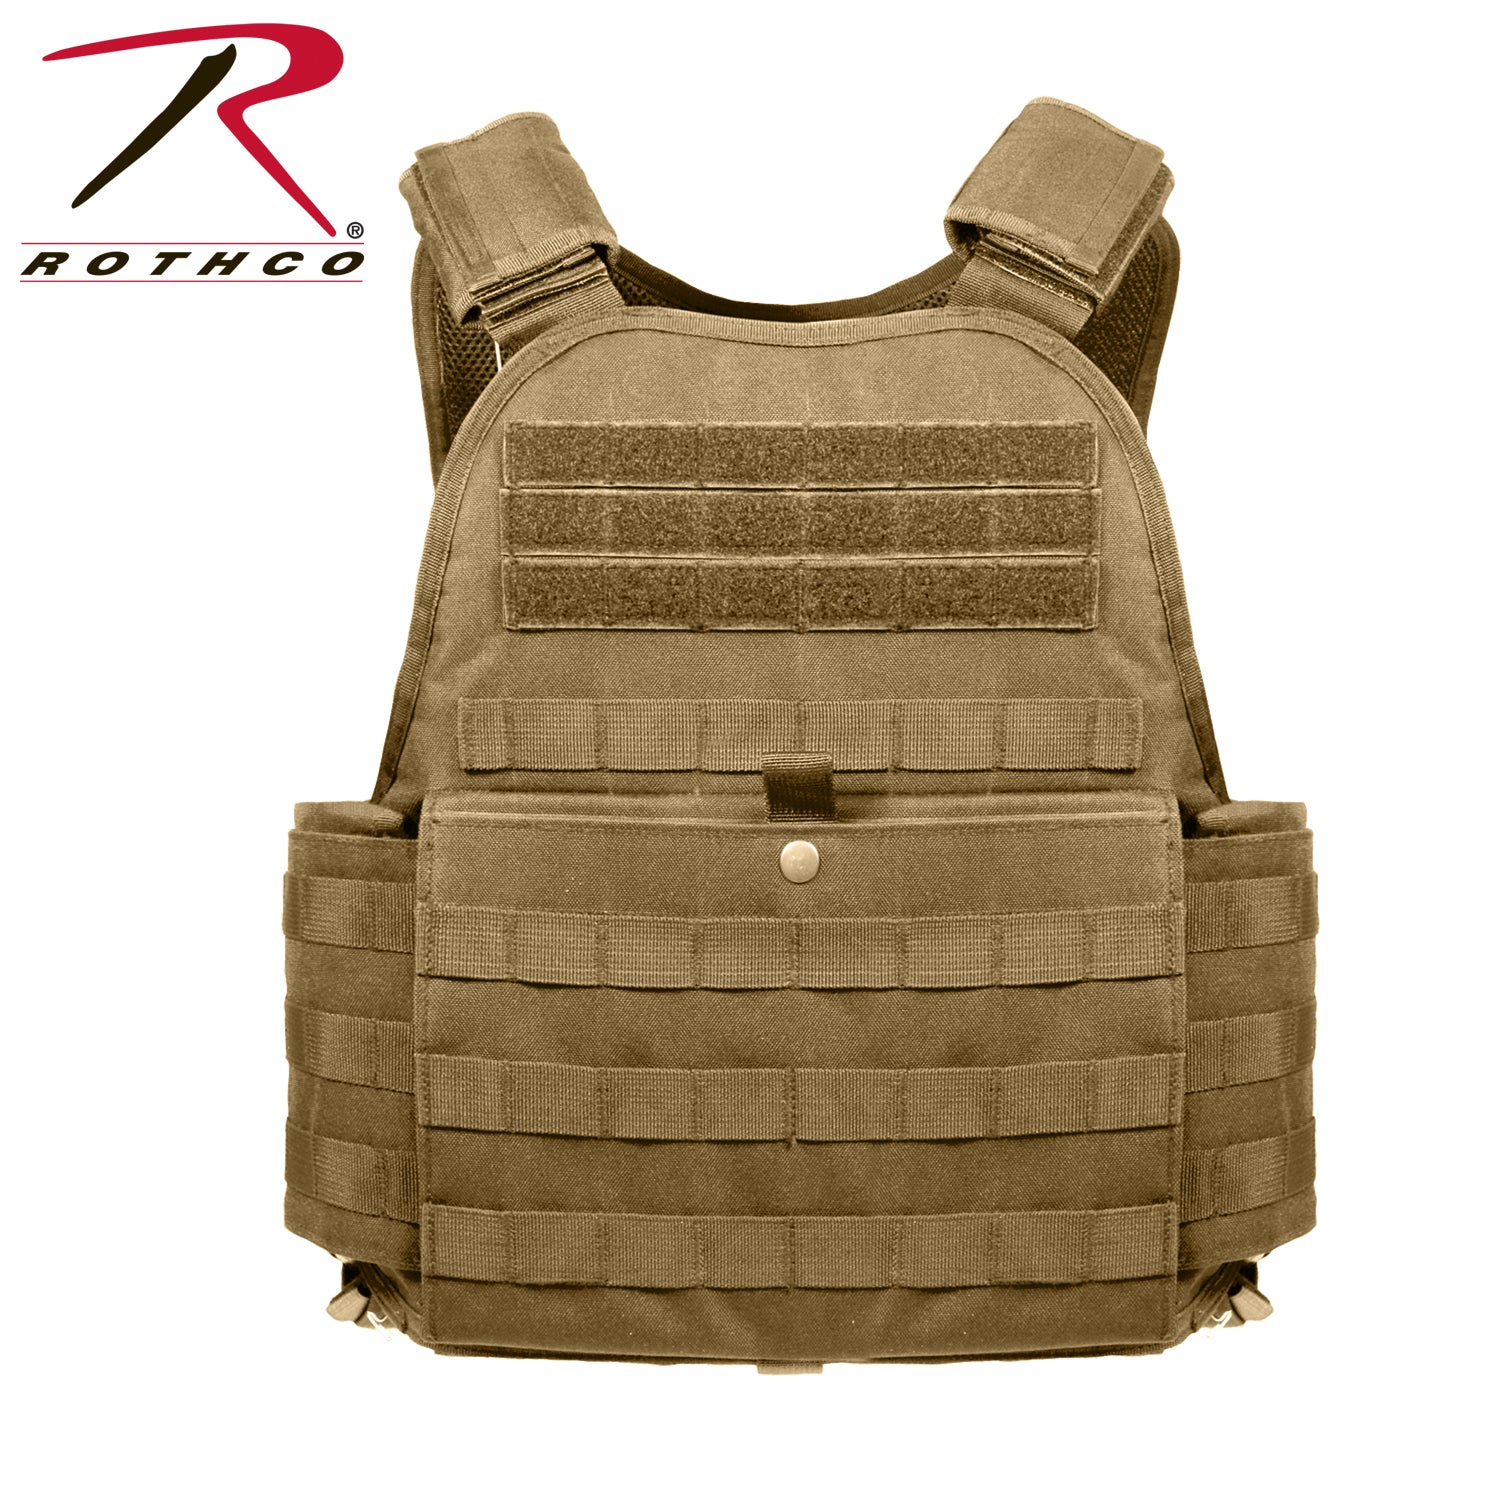 02 Caution Tape Phone Holster Tactical Vest For Sale 